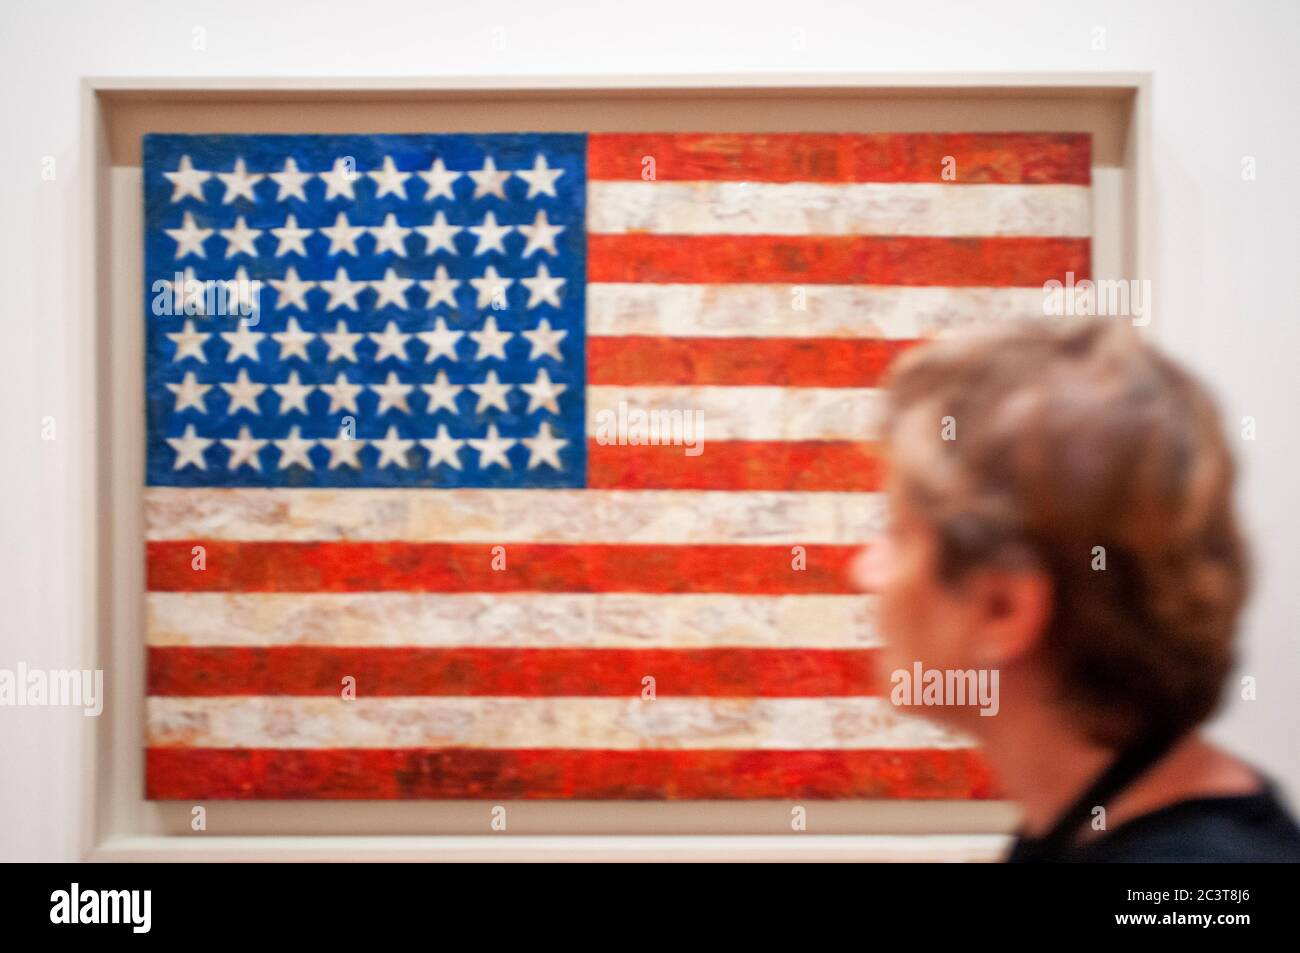 Jasper Johns's in the Flag painting, The Museum of Modern Art, MoMA, New York City, United States of America Stock Photo